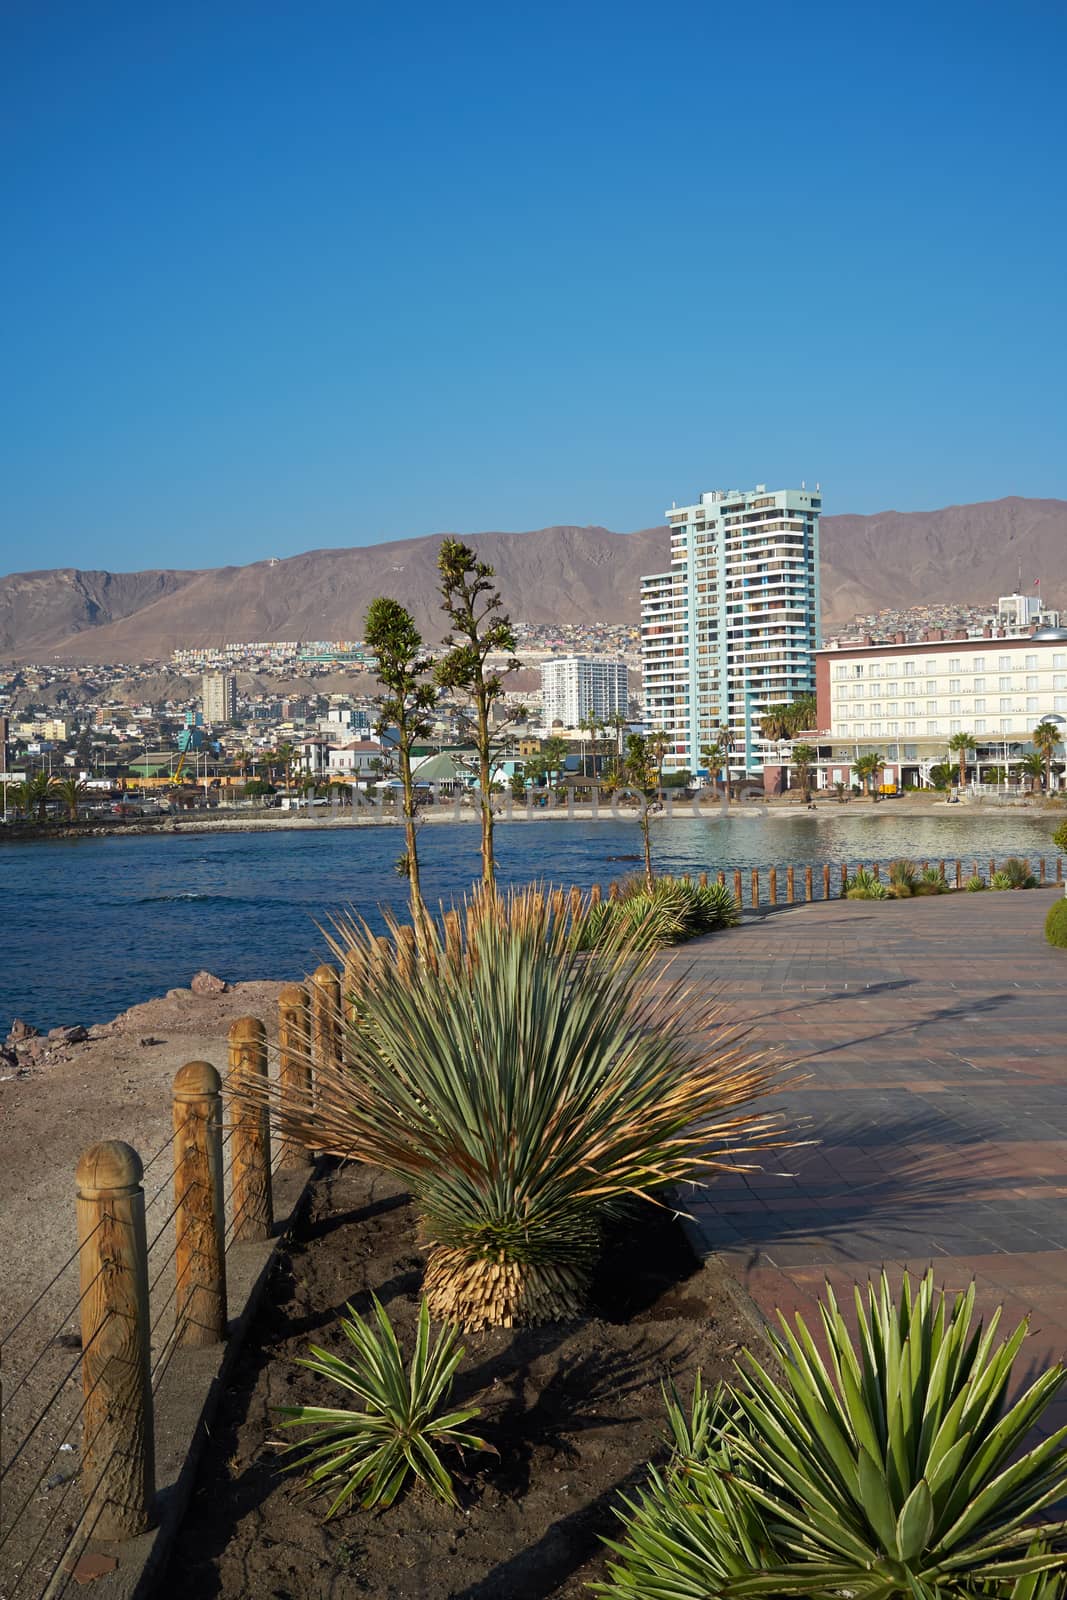 The City of Antofagasta on the coast of the Pacific in the Atacama region of Chile. Antofagasta is the second largest city in Chile and is one of the main centres for copper mining.